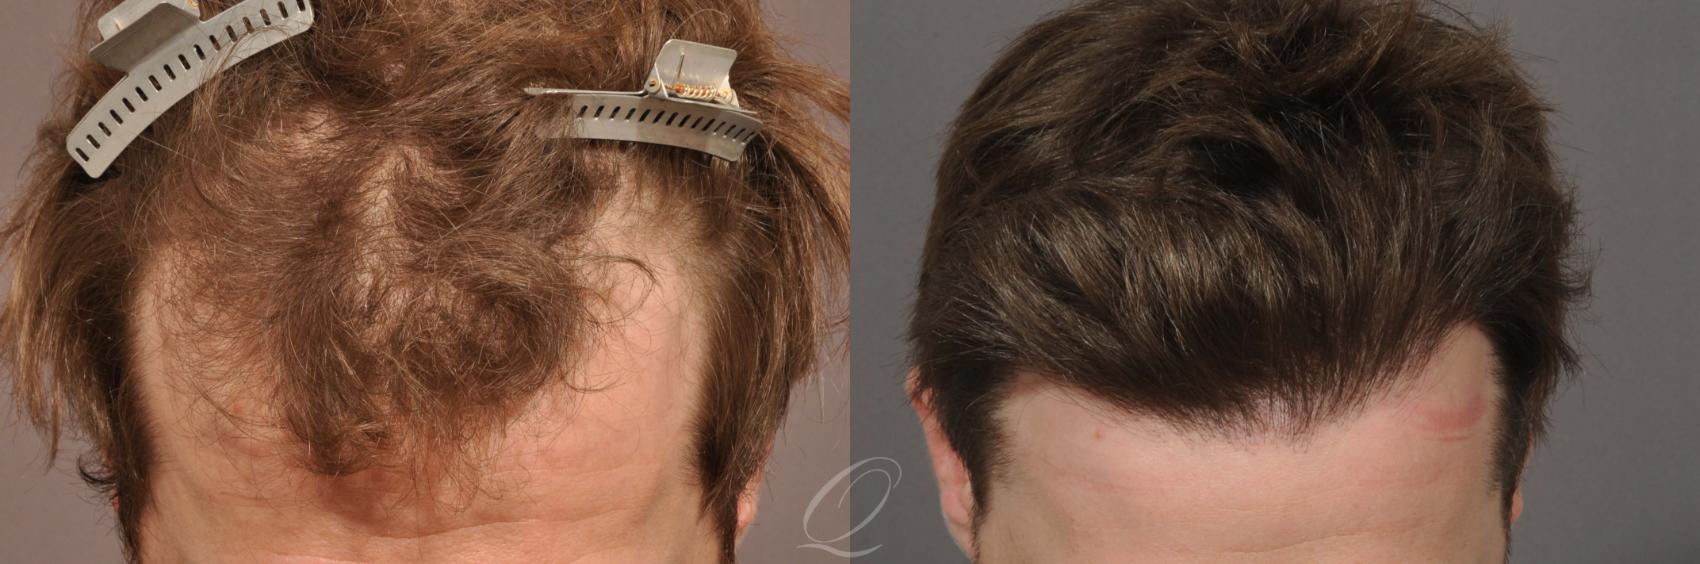 FUT Case 1023 Before & After View #2 | Rochester, Buffalo, & Syracuse, NY | Quatela Center for Hair Restoration